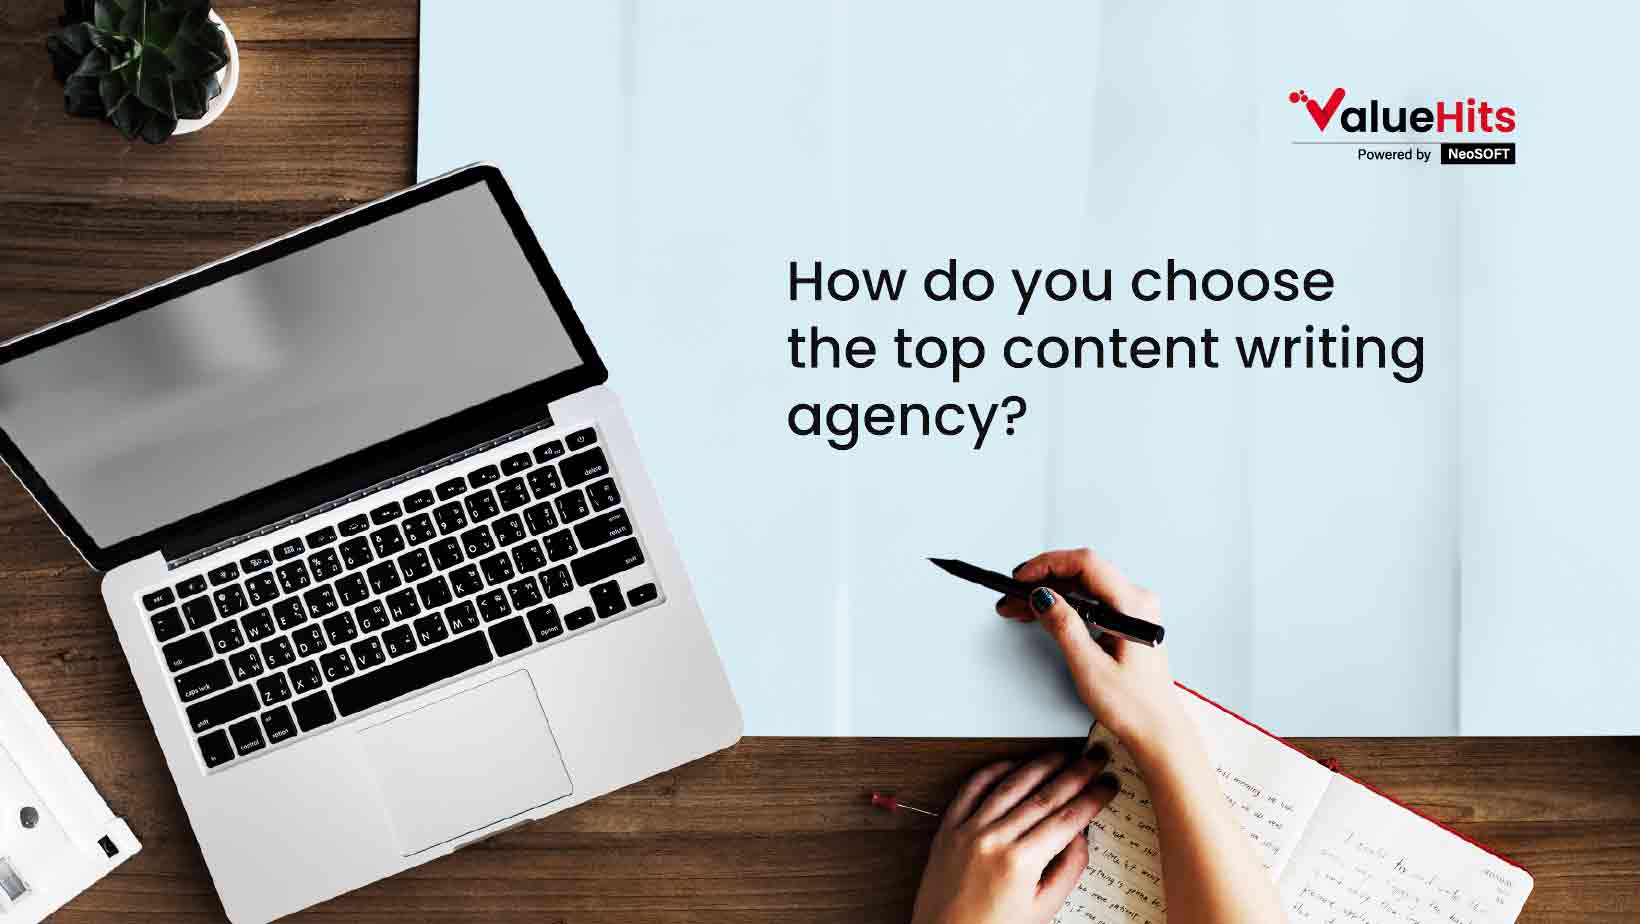 How do you choose the top content writing agency